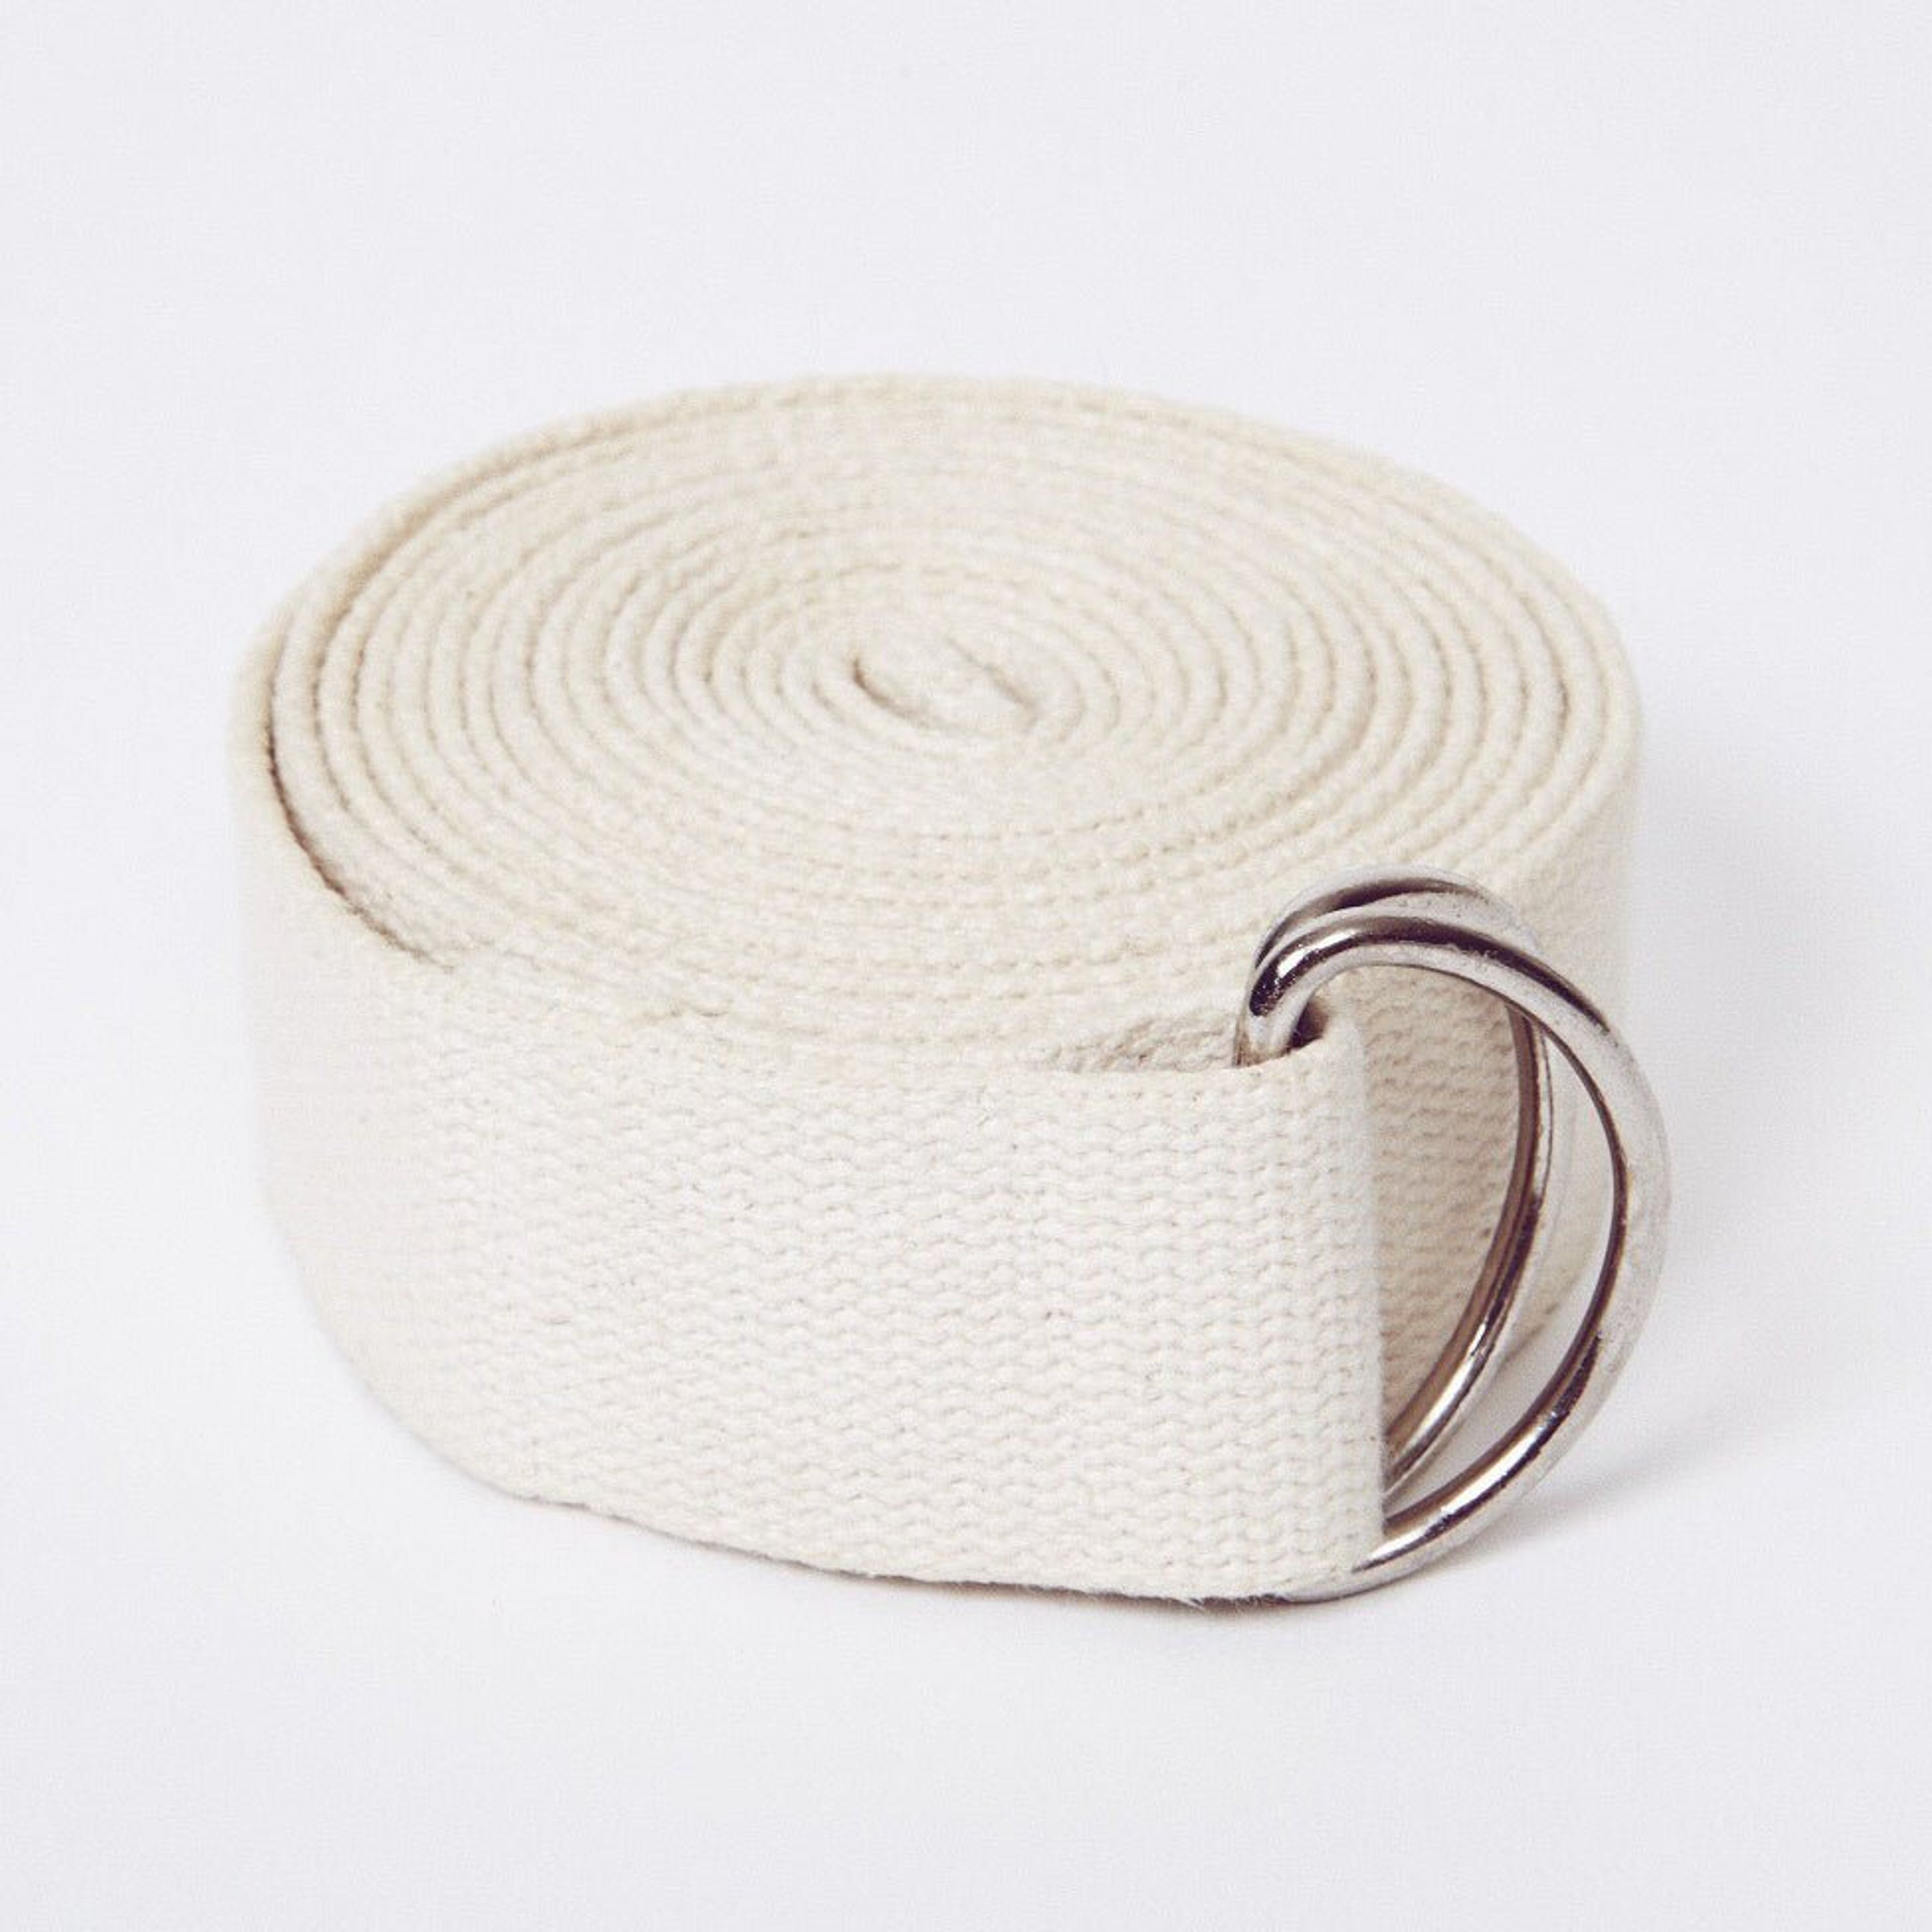 Cotton Alignment Strap by Ananday